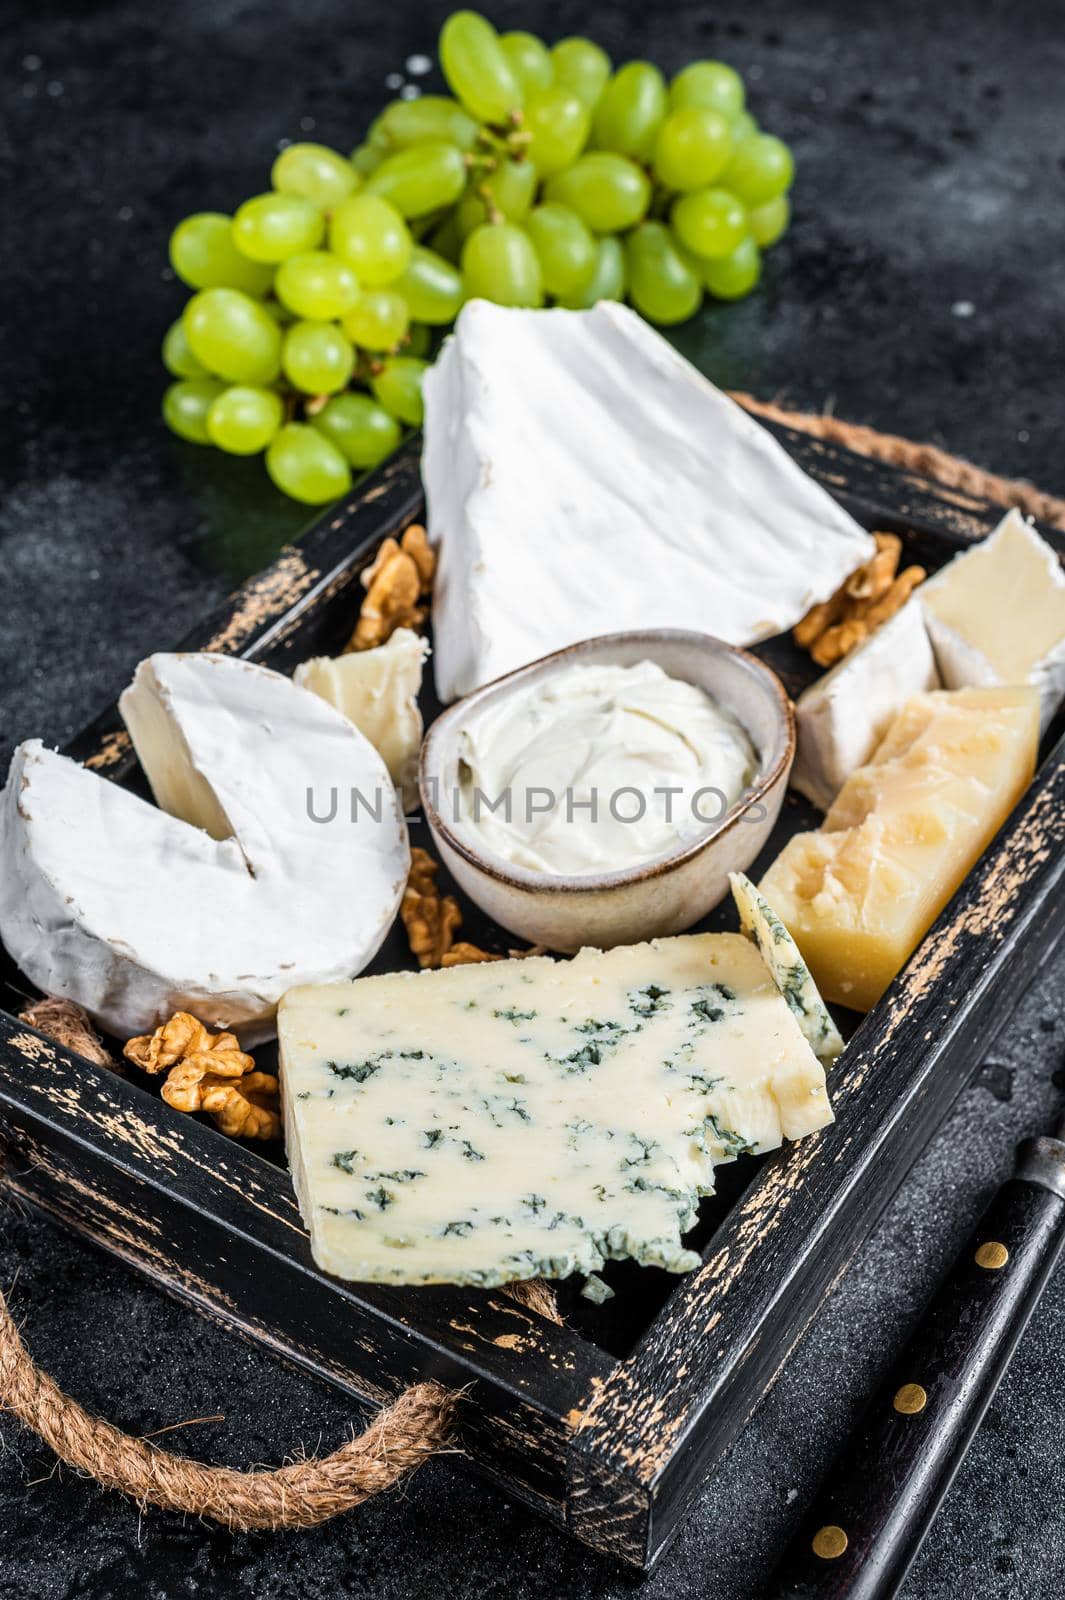 Assorted Cheese platter with Brie, Camembert, Roquefort, parmesan, blue cream cheese, grape and nuts. Black background. Top view by Composter